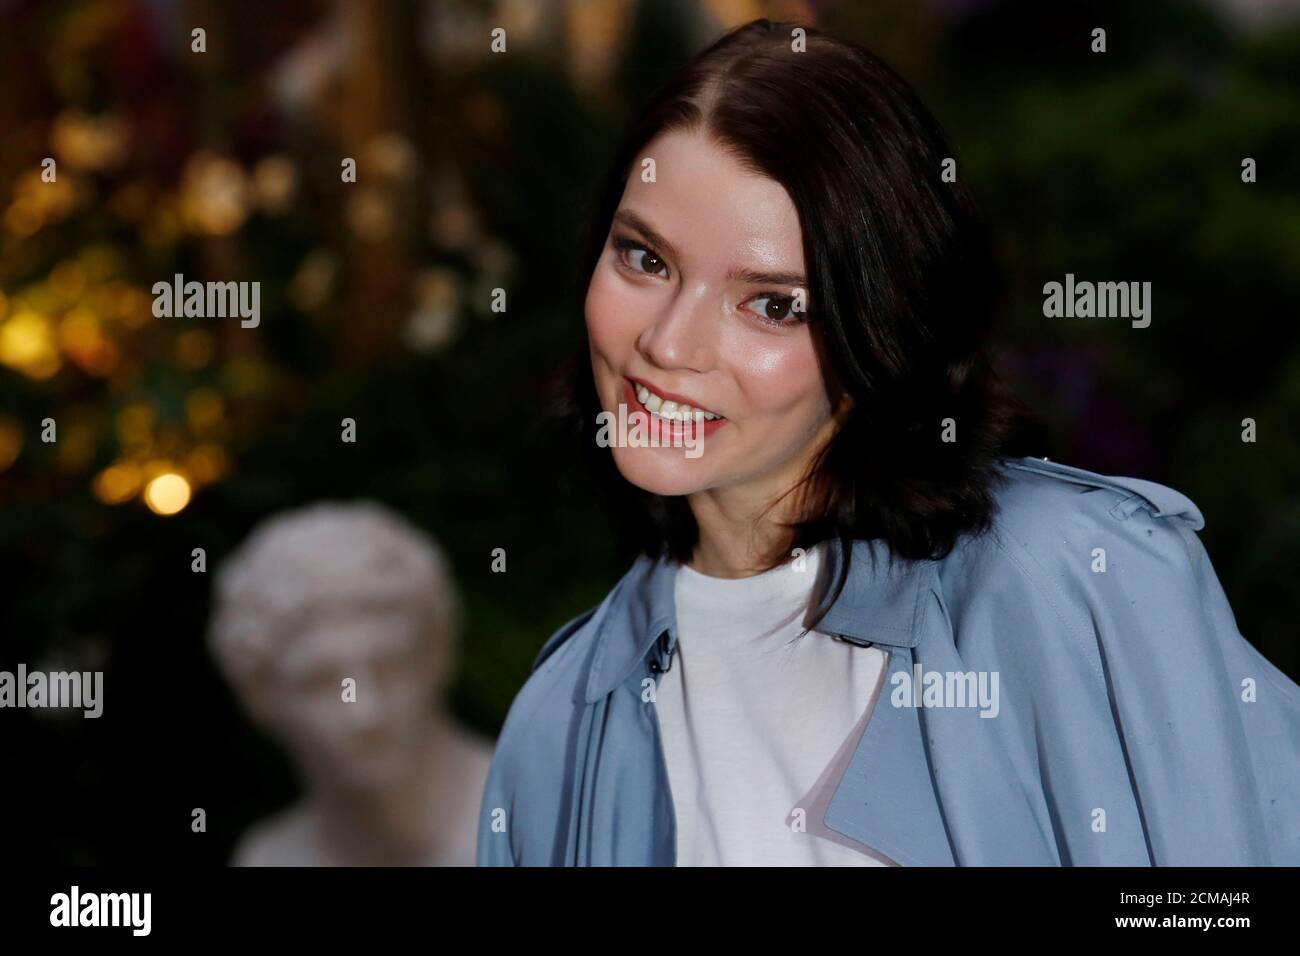 U.S. actress Anya Taylor-Joy arrives for the presentation of the Burberry  collection during London Fashion Week Spring/Summer 2017 in London,  Britain, September 19, 2016. REUTERS/Luke MacGregor Stock Photo - Alamy